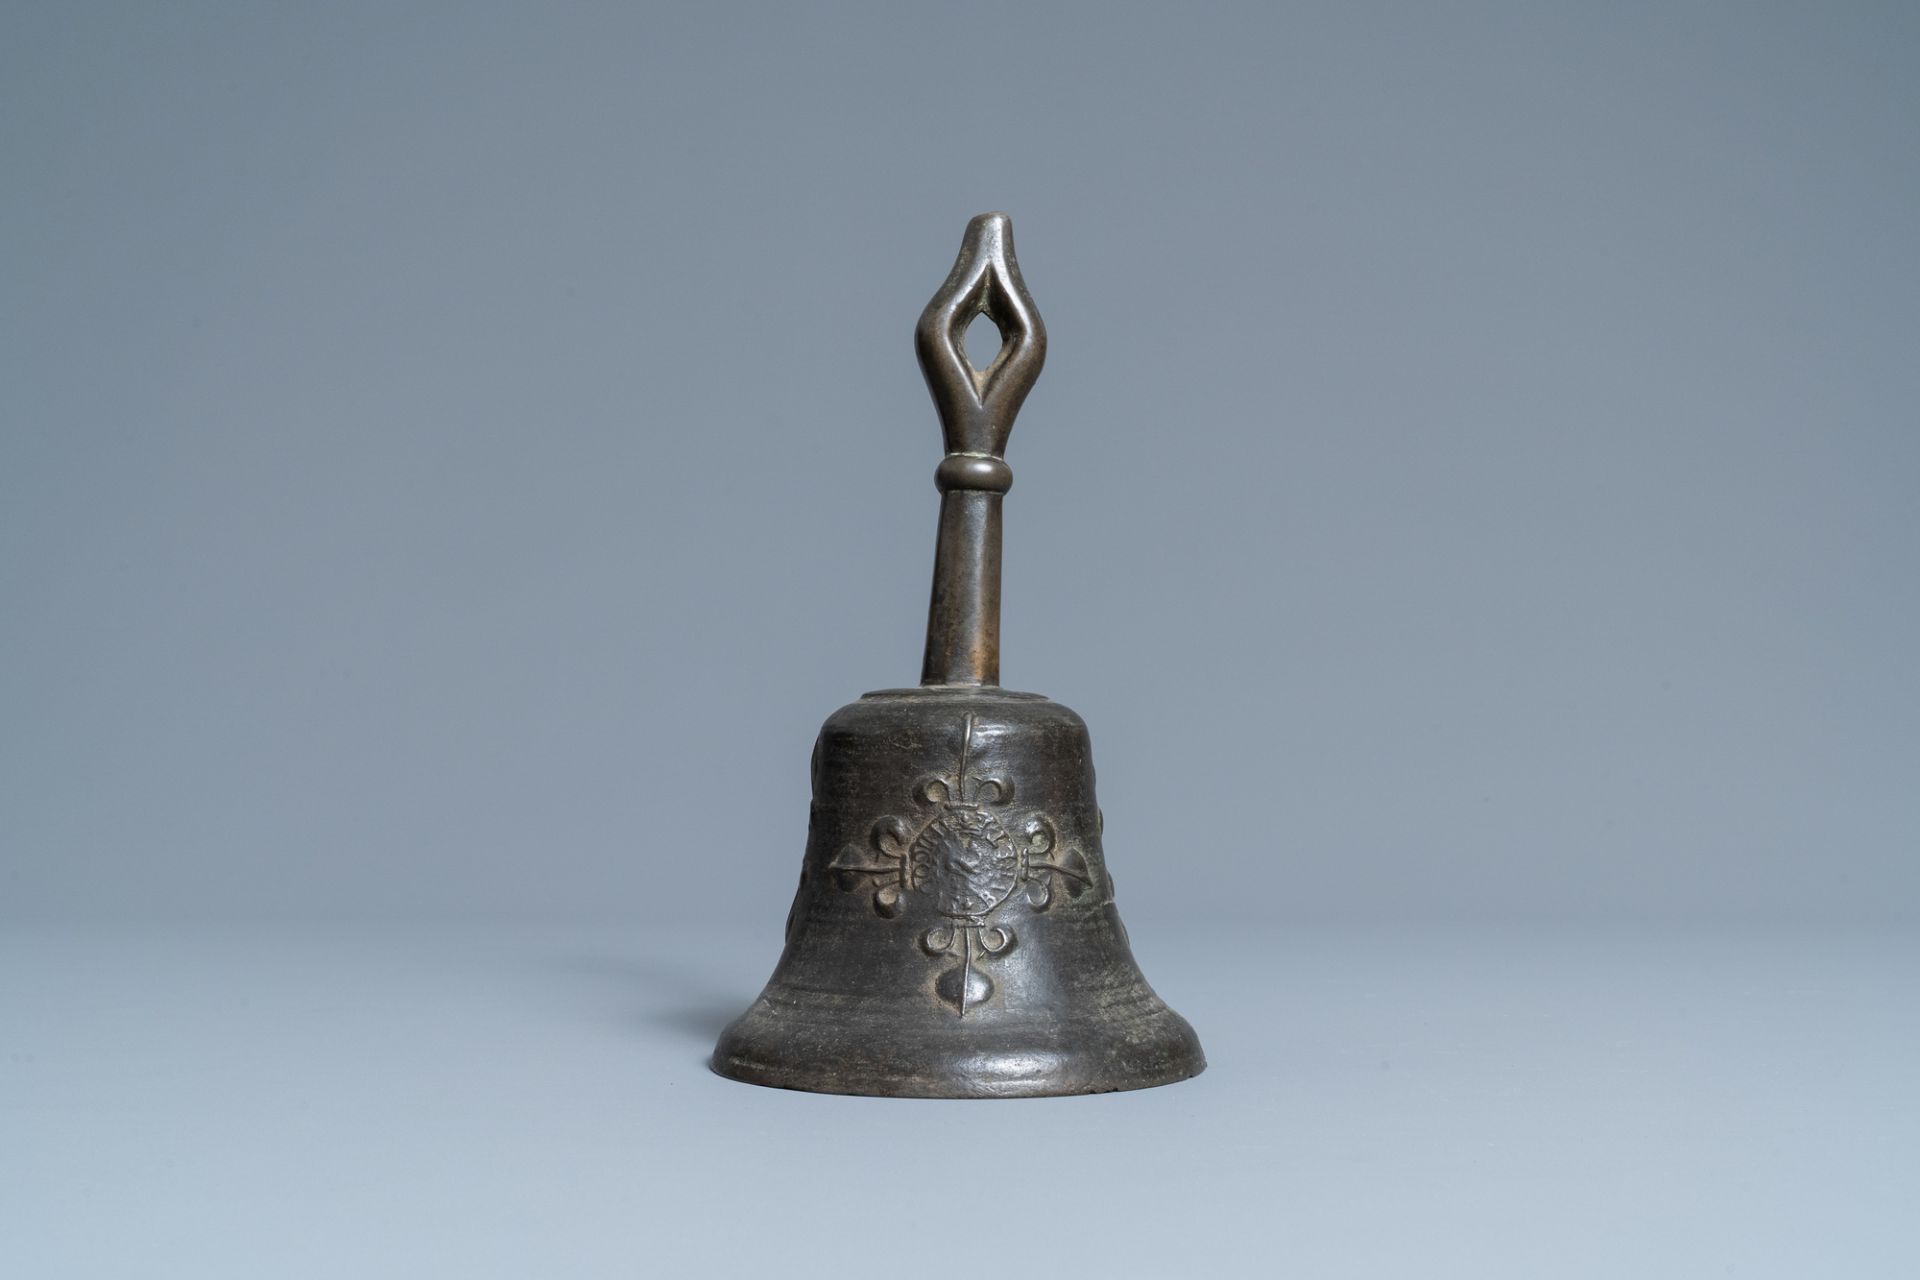 A bronze bell with applied fleur-de-lis and an IHS medallion, France, 16th C. - Image 2 of 7